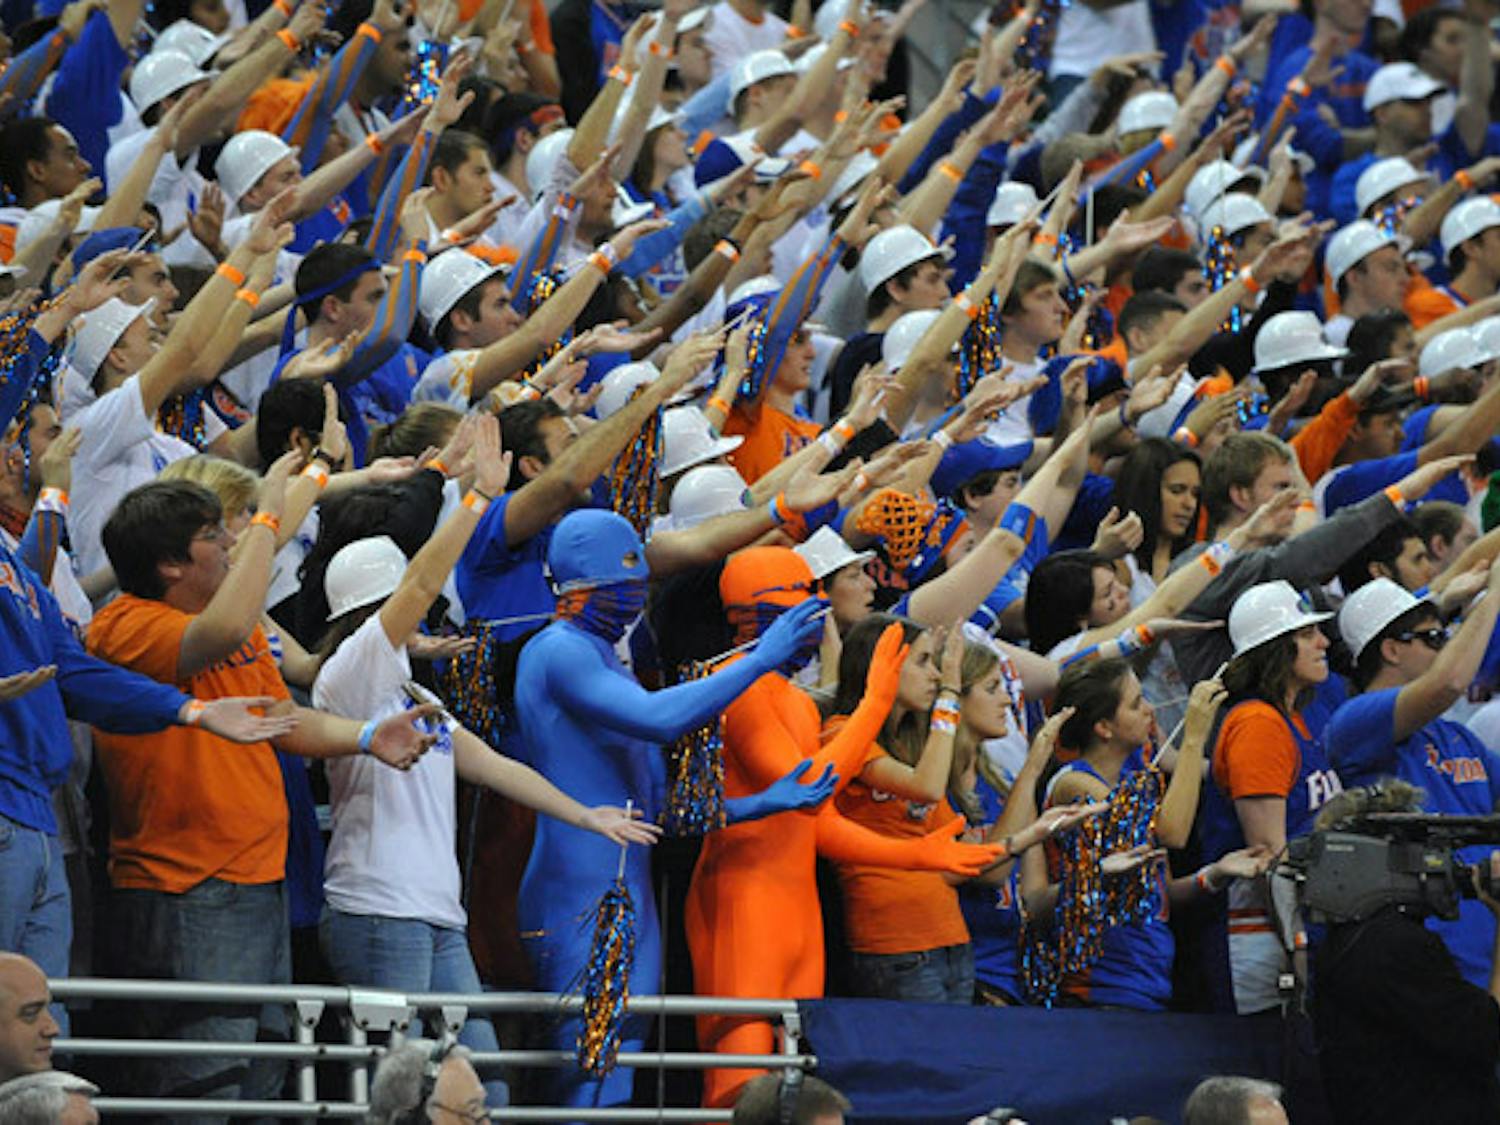 Gator fans crowd the stands during a UF basketball game at the Stephen C. O'Connell Center. The O'Dome will be renovated by the end of the week.